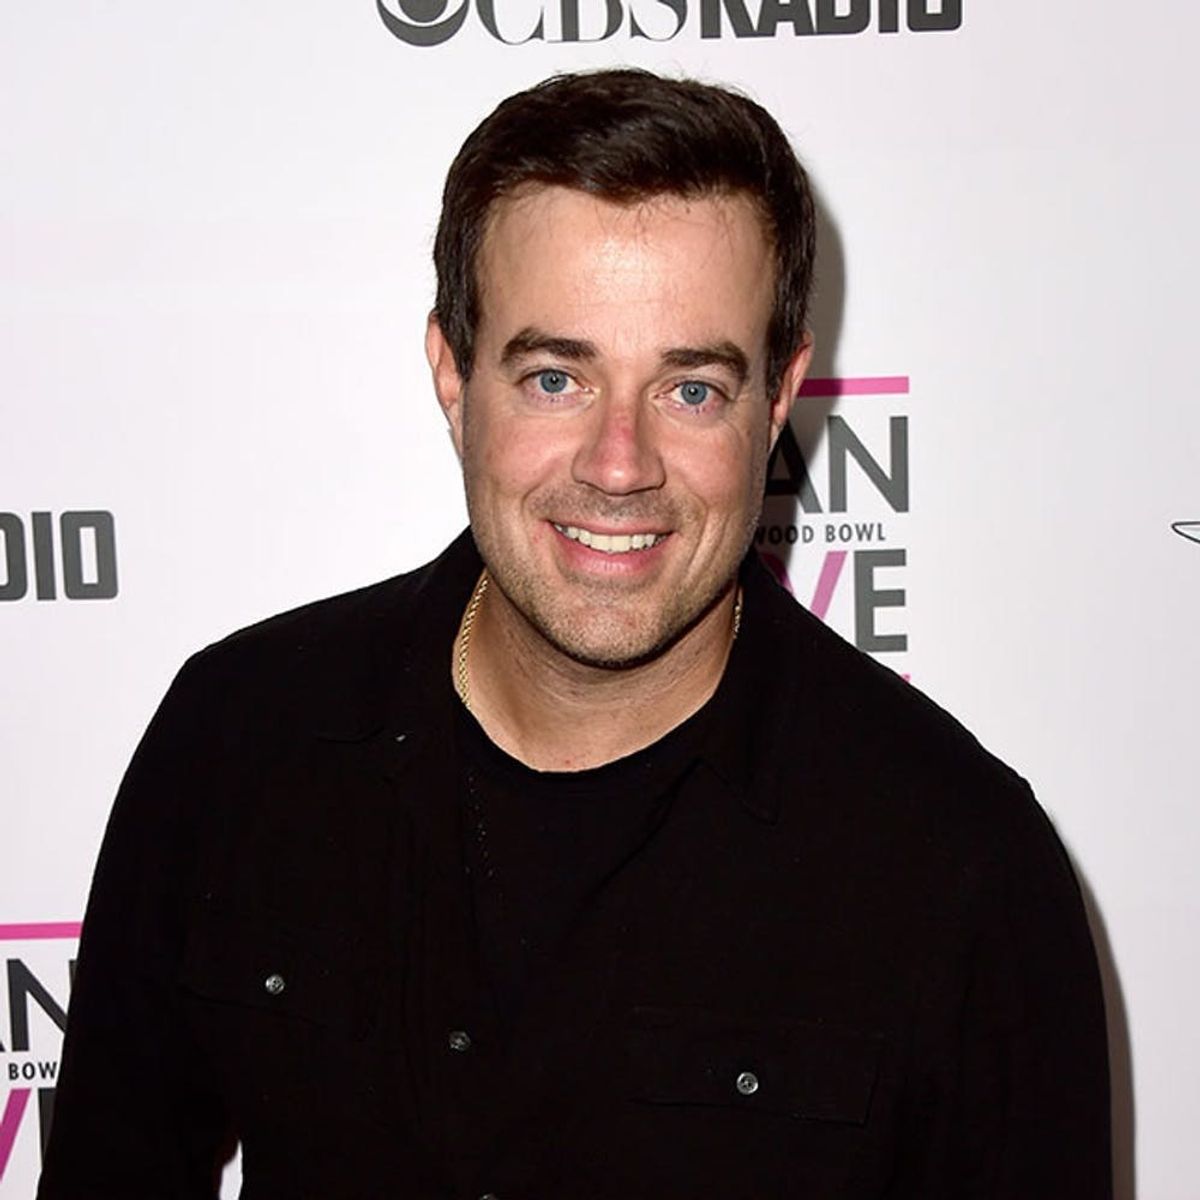 Carson Daly + Siri Pinter Had a Christmas Eve (Eve!) Wedding That Will Make You Swoon